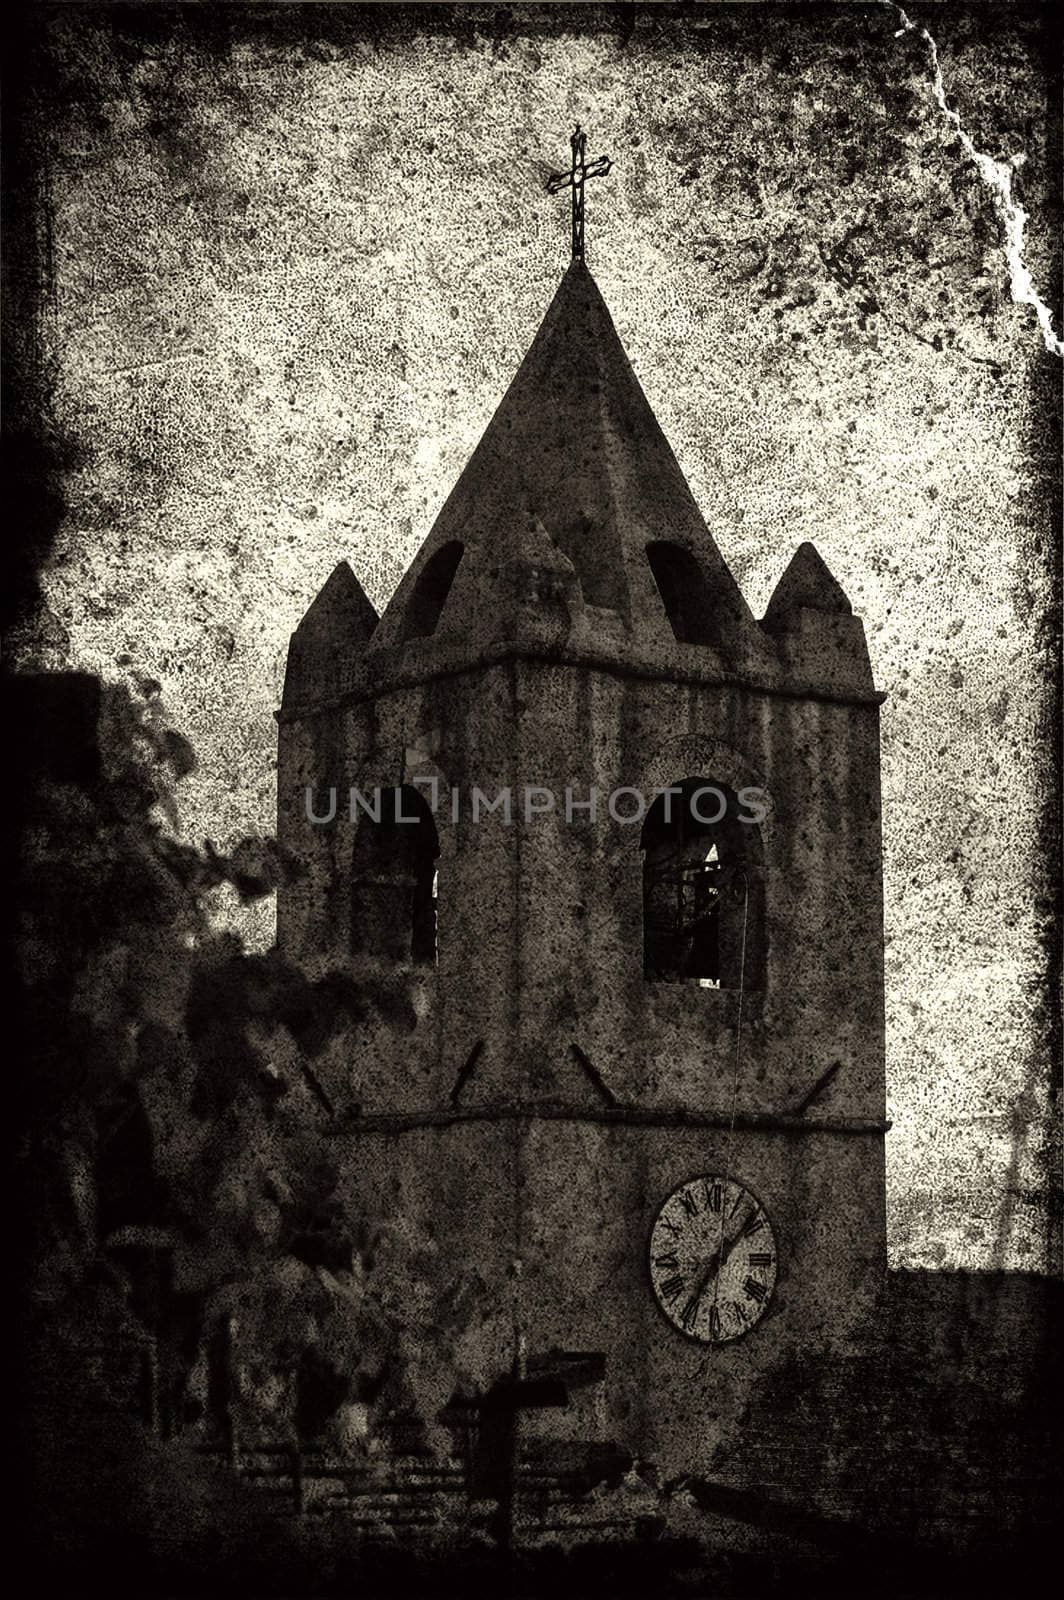 A grunge image of a bell tower